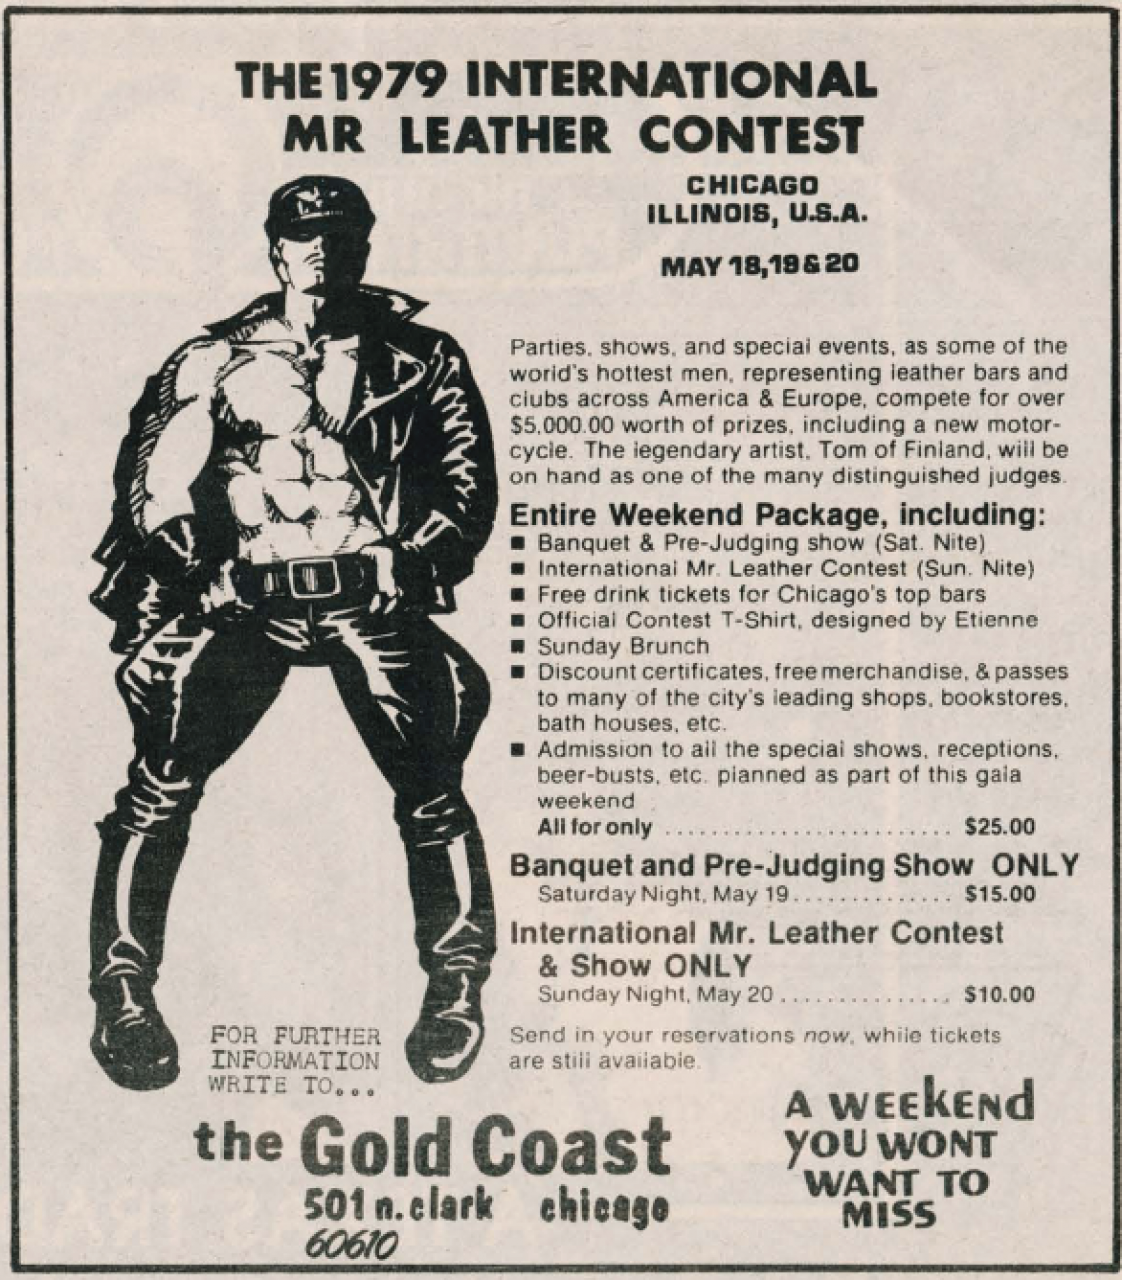 A Glimpse Into Early Gay Leather Contests